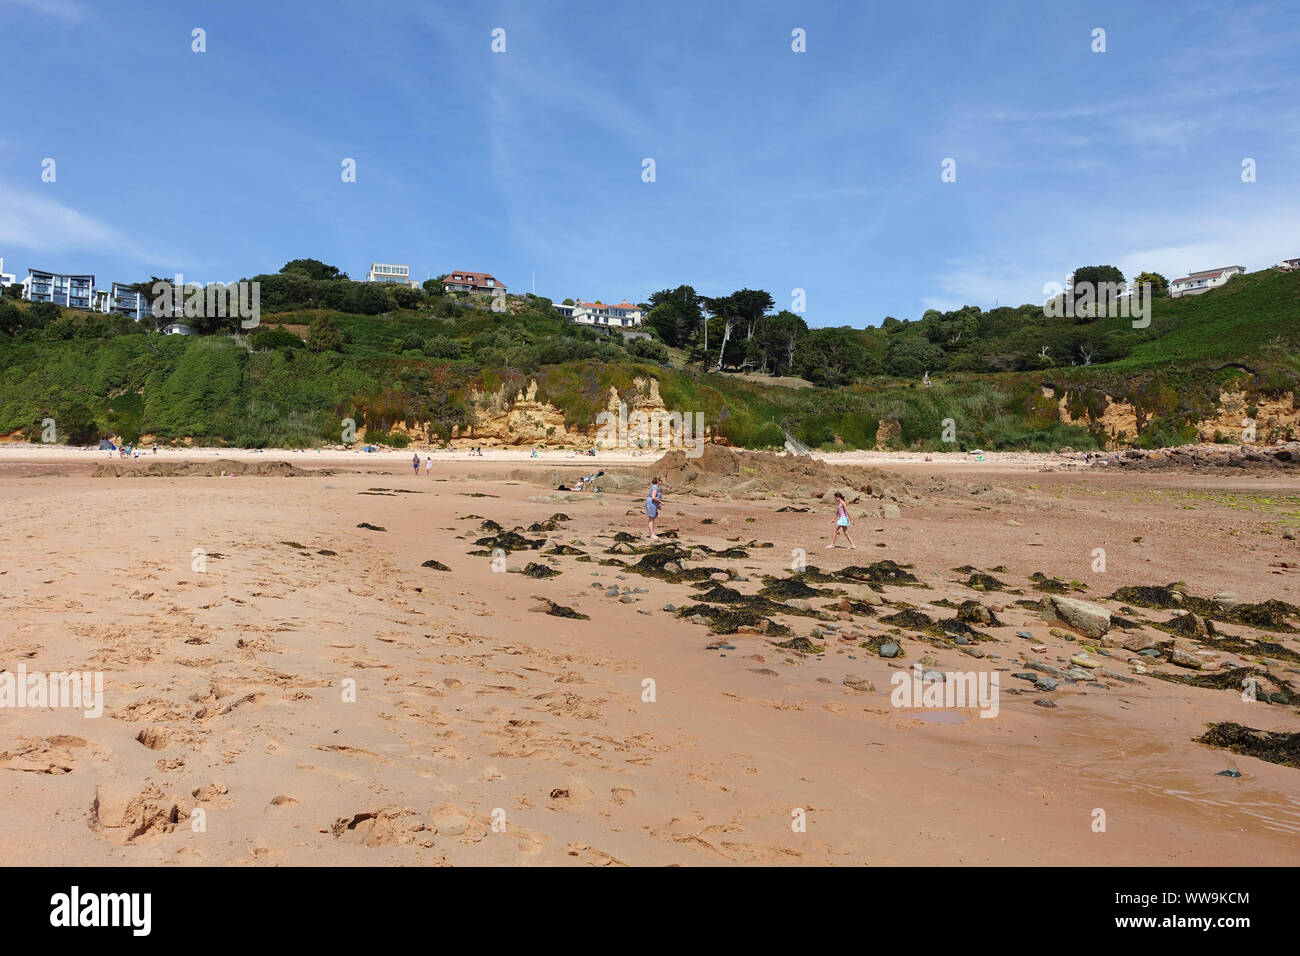 Portelet Bay, Jersey 21 July 2019: Holiday makers on the beach at Portelet bay in Jersey, Channel Islands Stock Photo